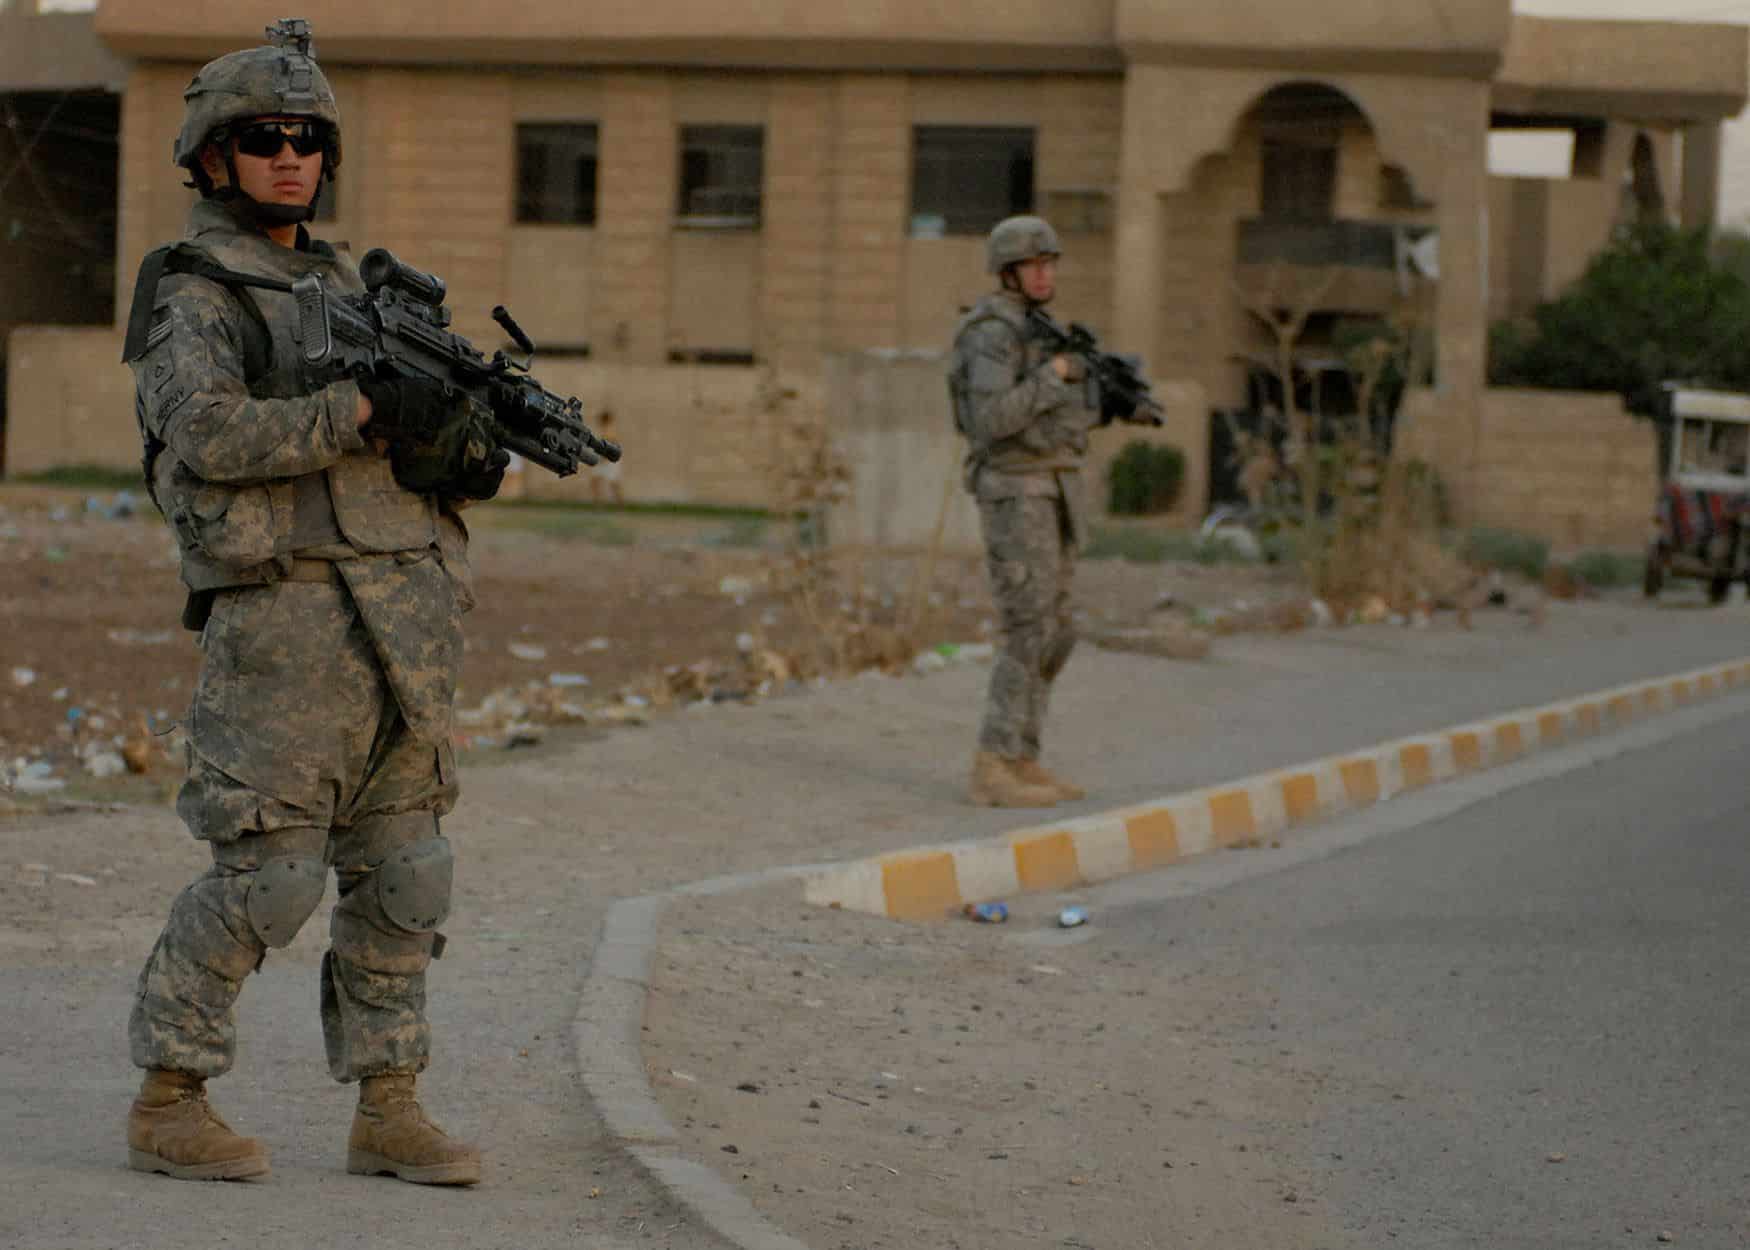 Pfc. John Henry, an infantryman from Prairie Grove, Ark., assigned to Company C, 2nd Battalion, 4th Infantry Regiment, attached to 1st Brigade Combat Team, 4th Infantry Division, Multi-National Division-Baghdad, patrols in the Doura community in southern Baghdad's Rashid district Aug. 14, 2008.